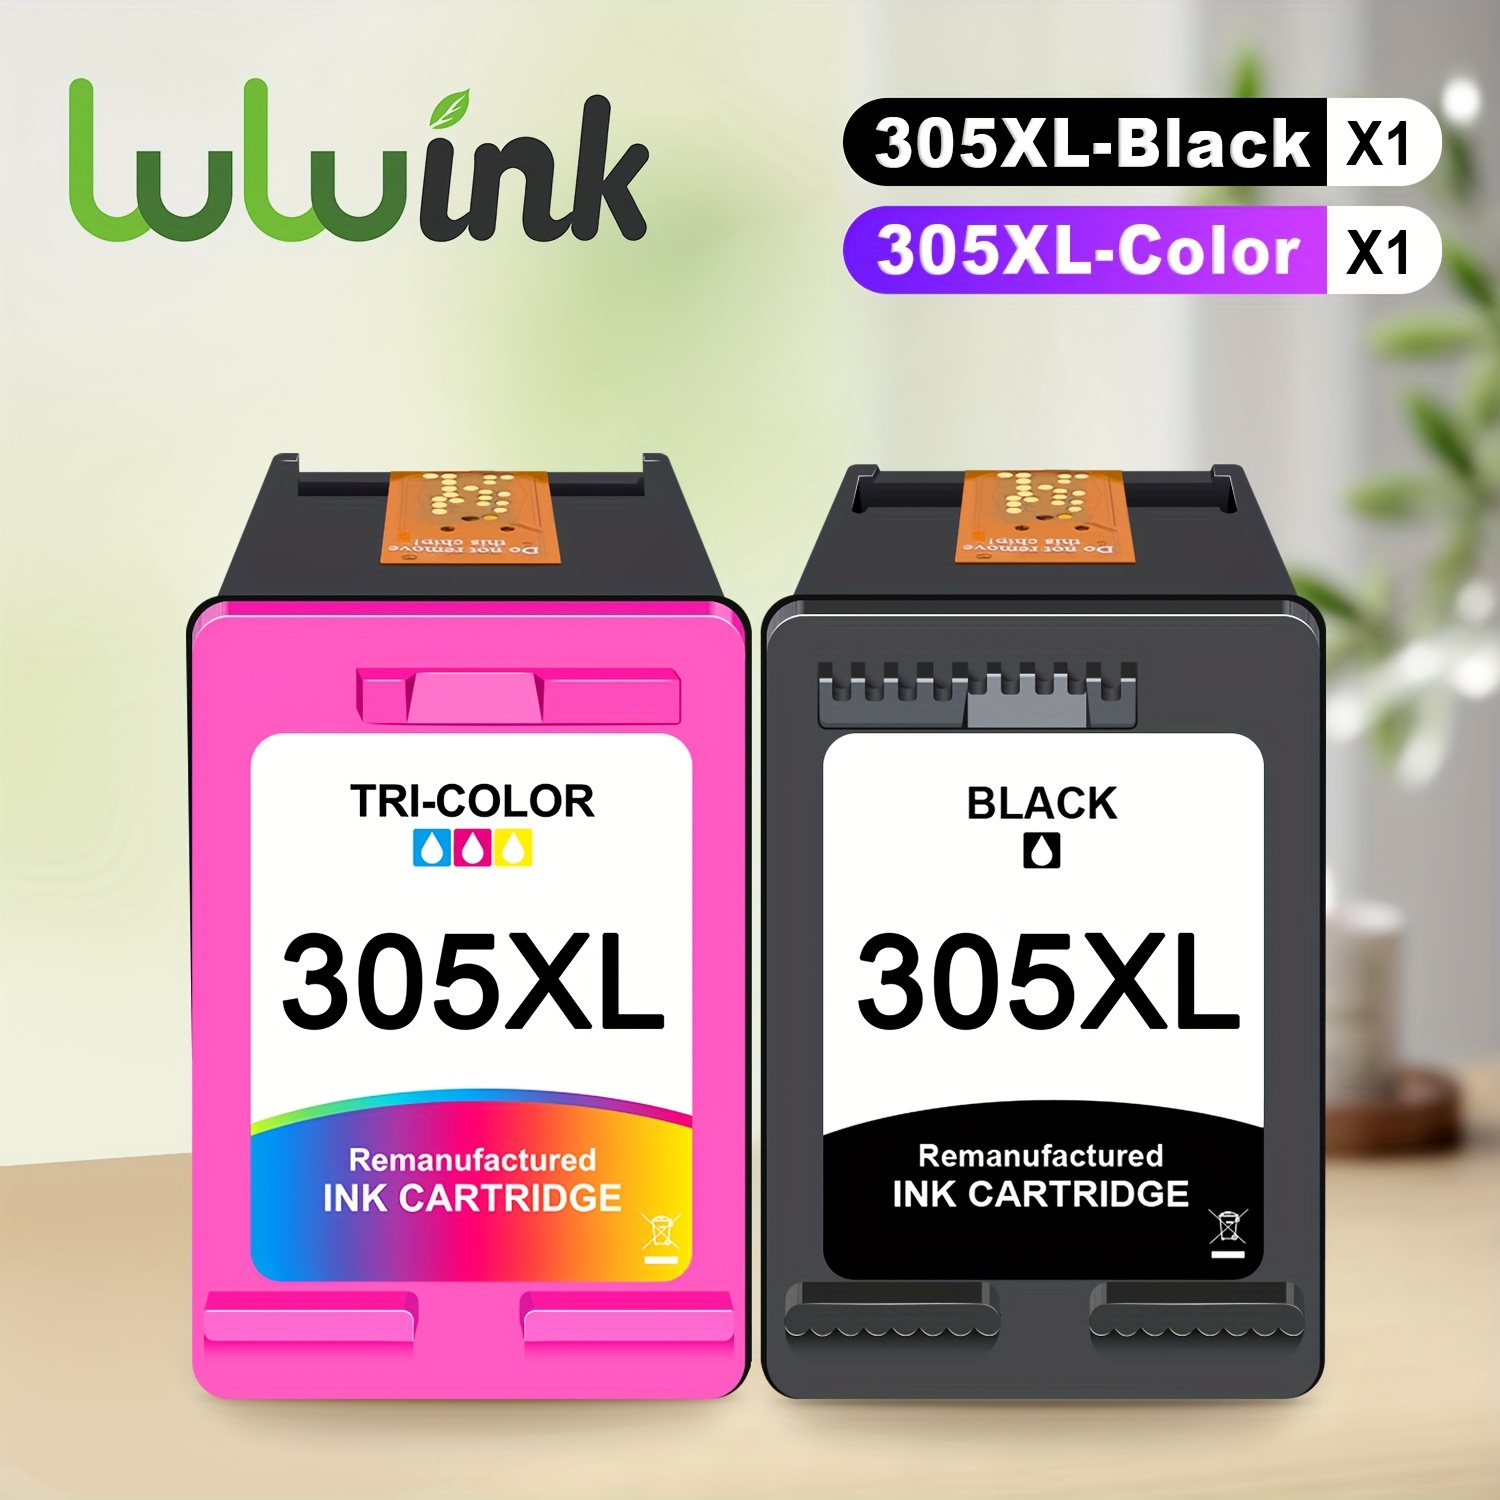 

High-yield 305xl Remanufactured Ink Cartridges, Compatible With Hp Printers 2700/4100 Series & More - Black & Tri-color, 20ml & 19ml Capacity